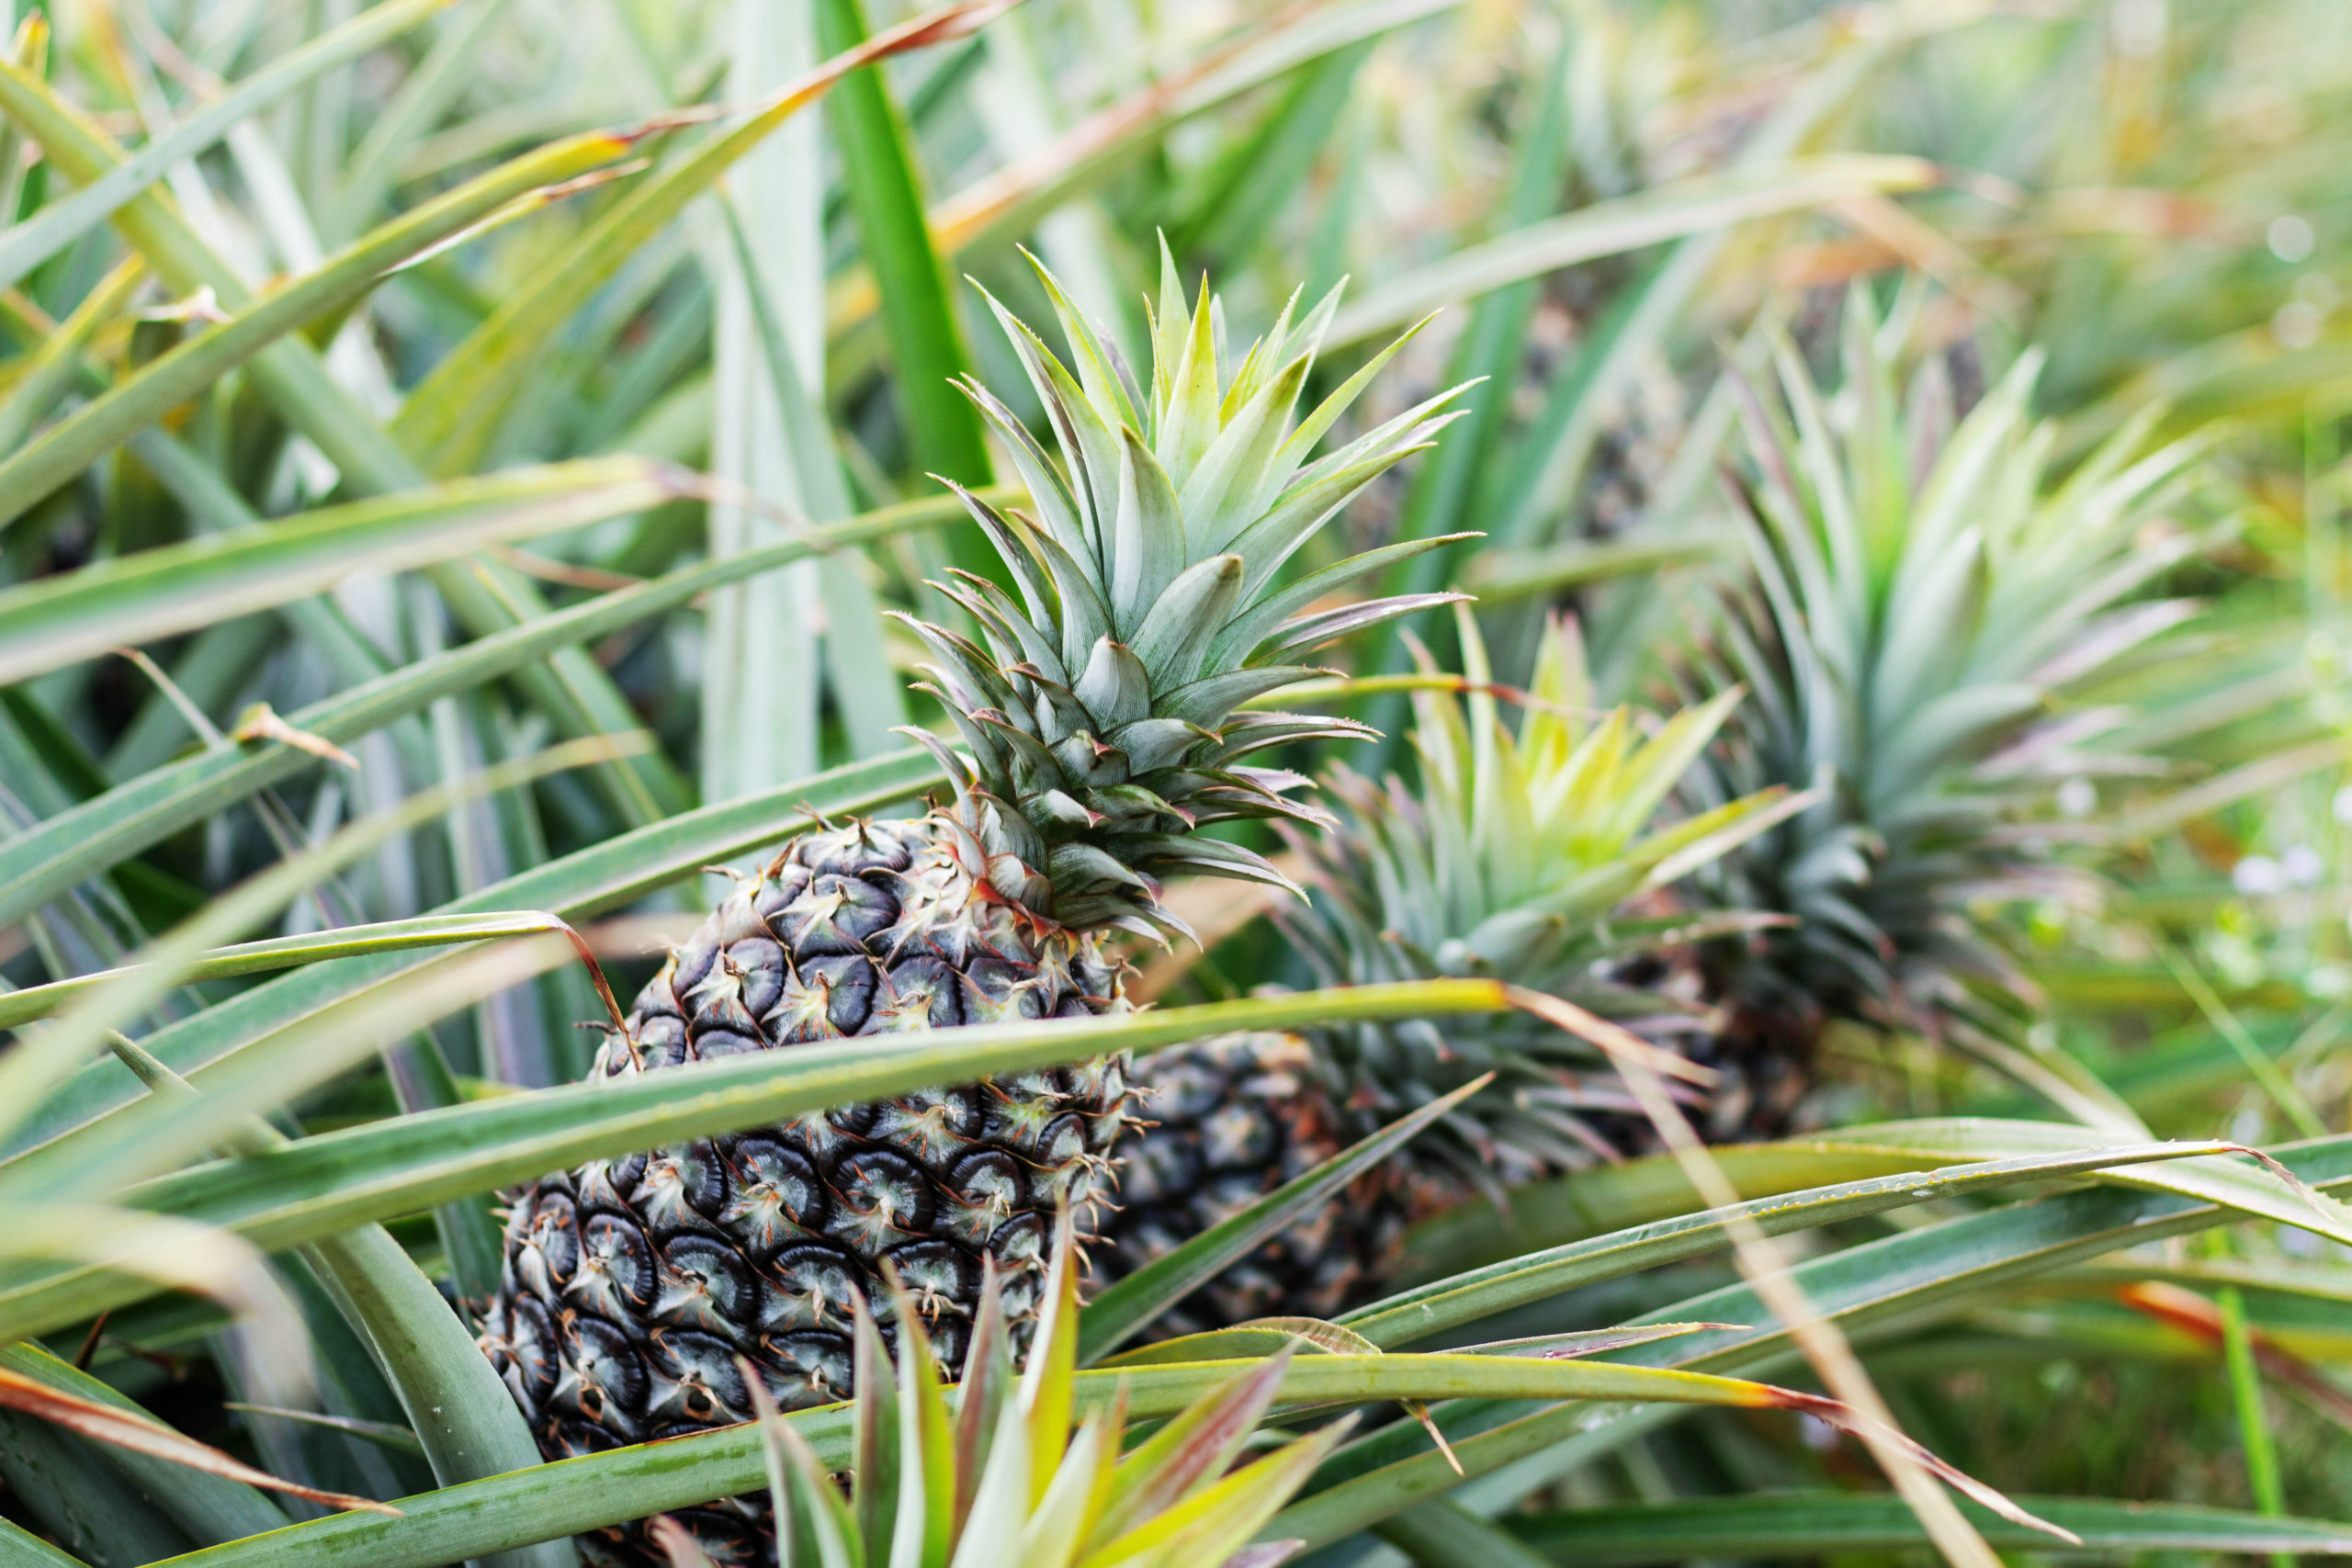 Pineapples used for sustainable manufacturing